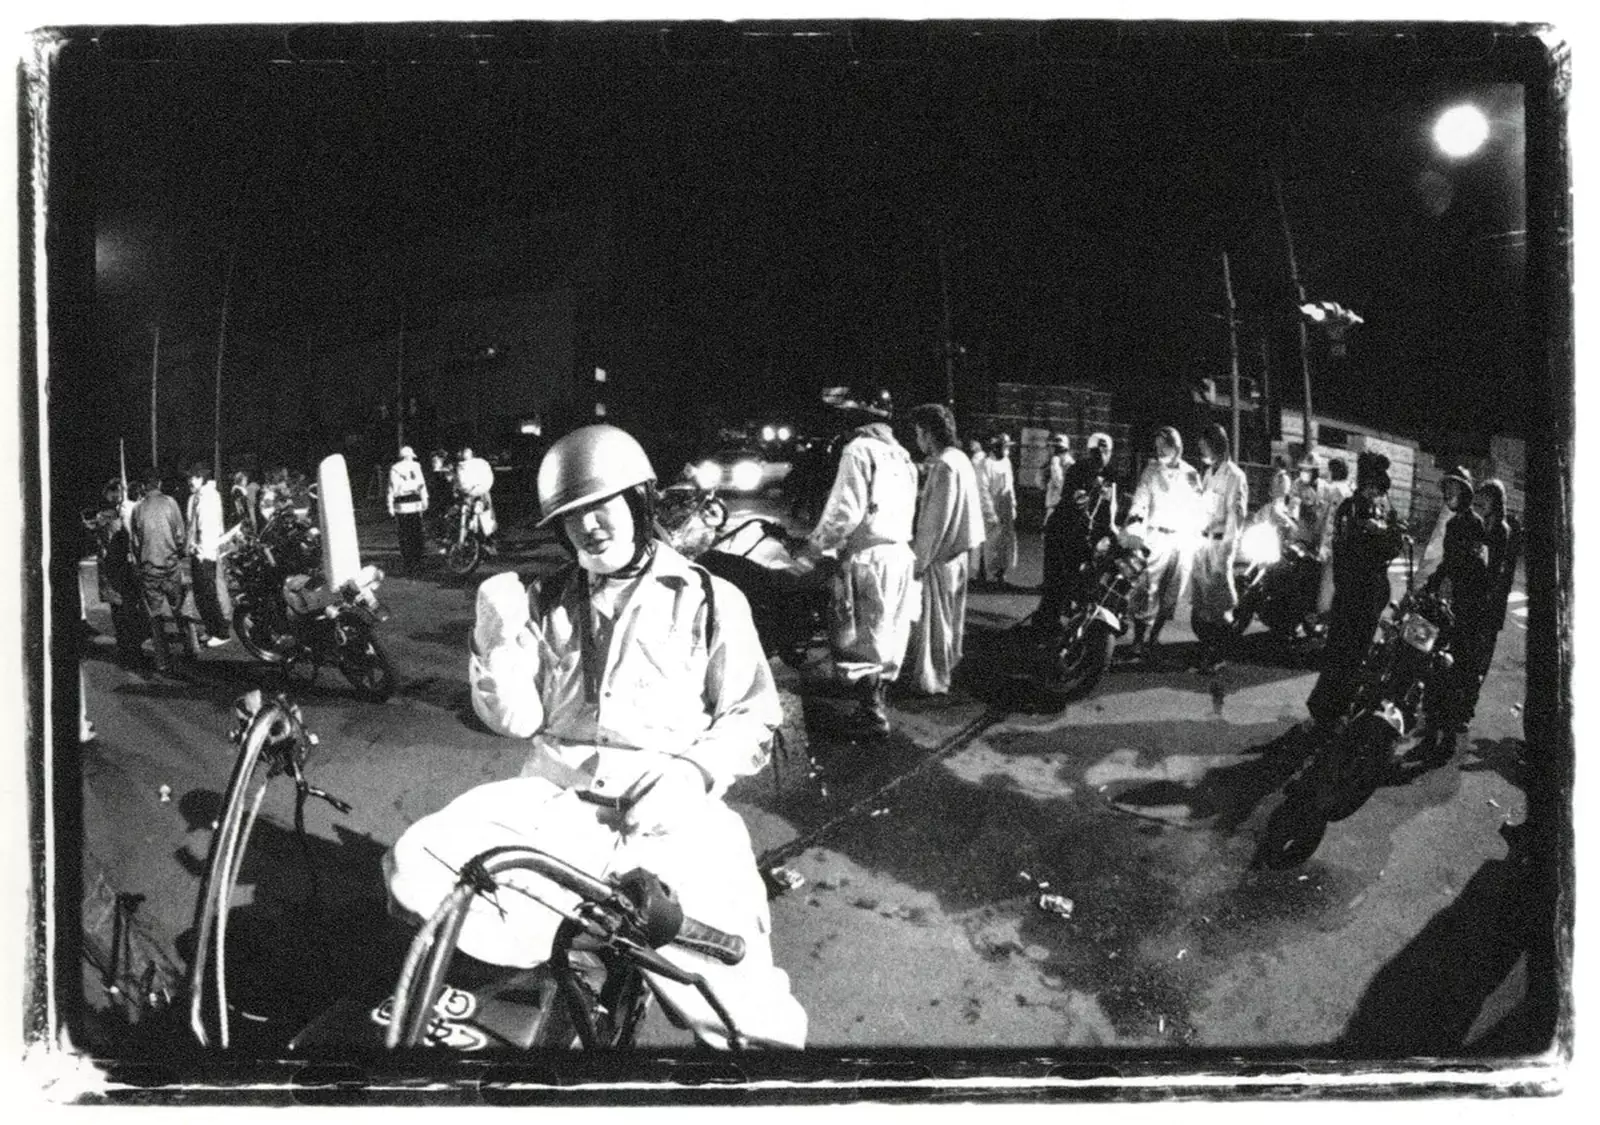 bosozoku-the-stylish-legacy-of-japans-rebel-motorcycle-gangs-12.png